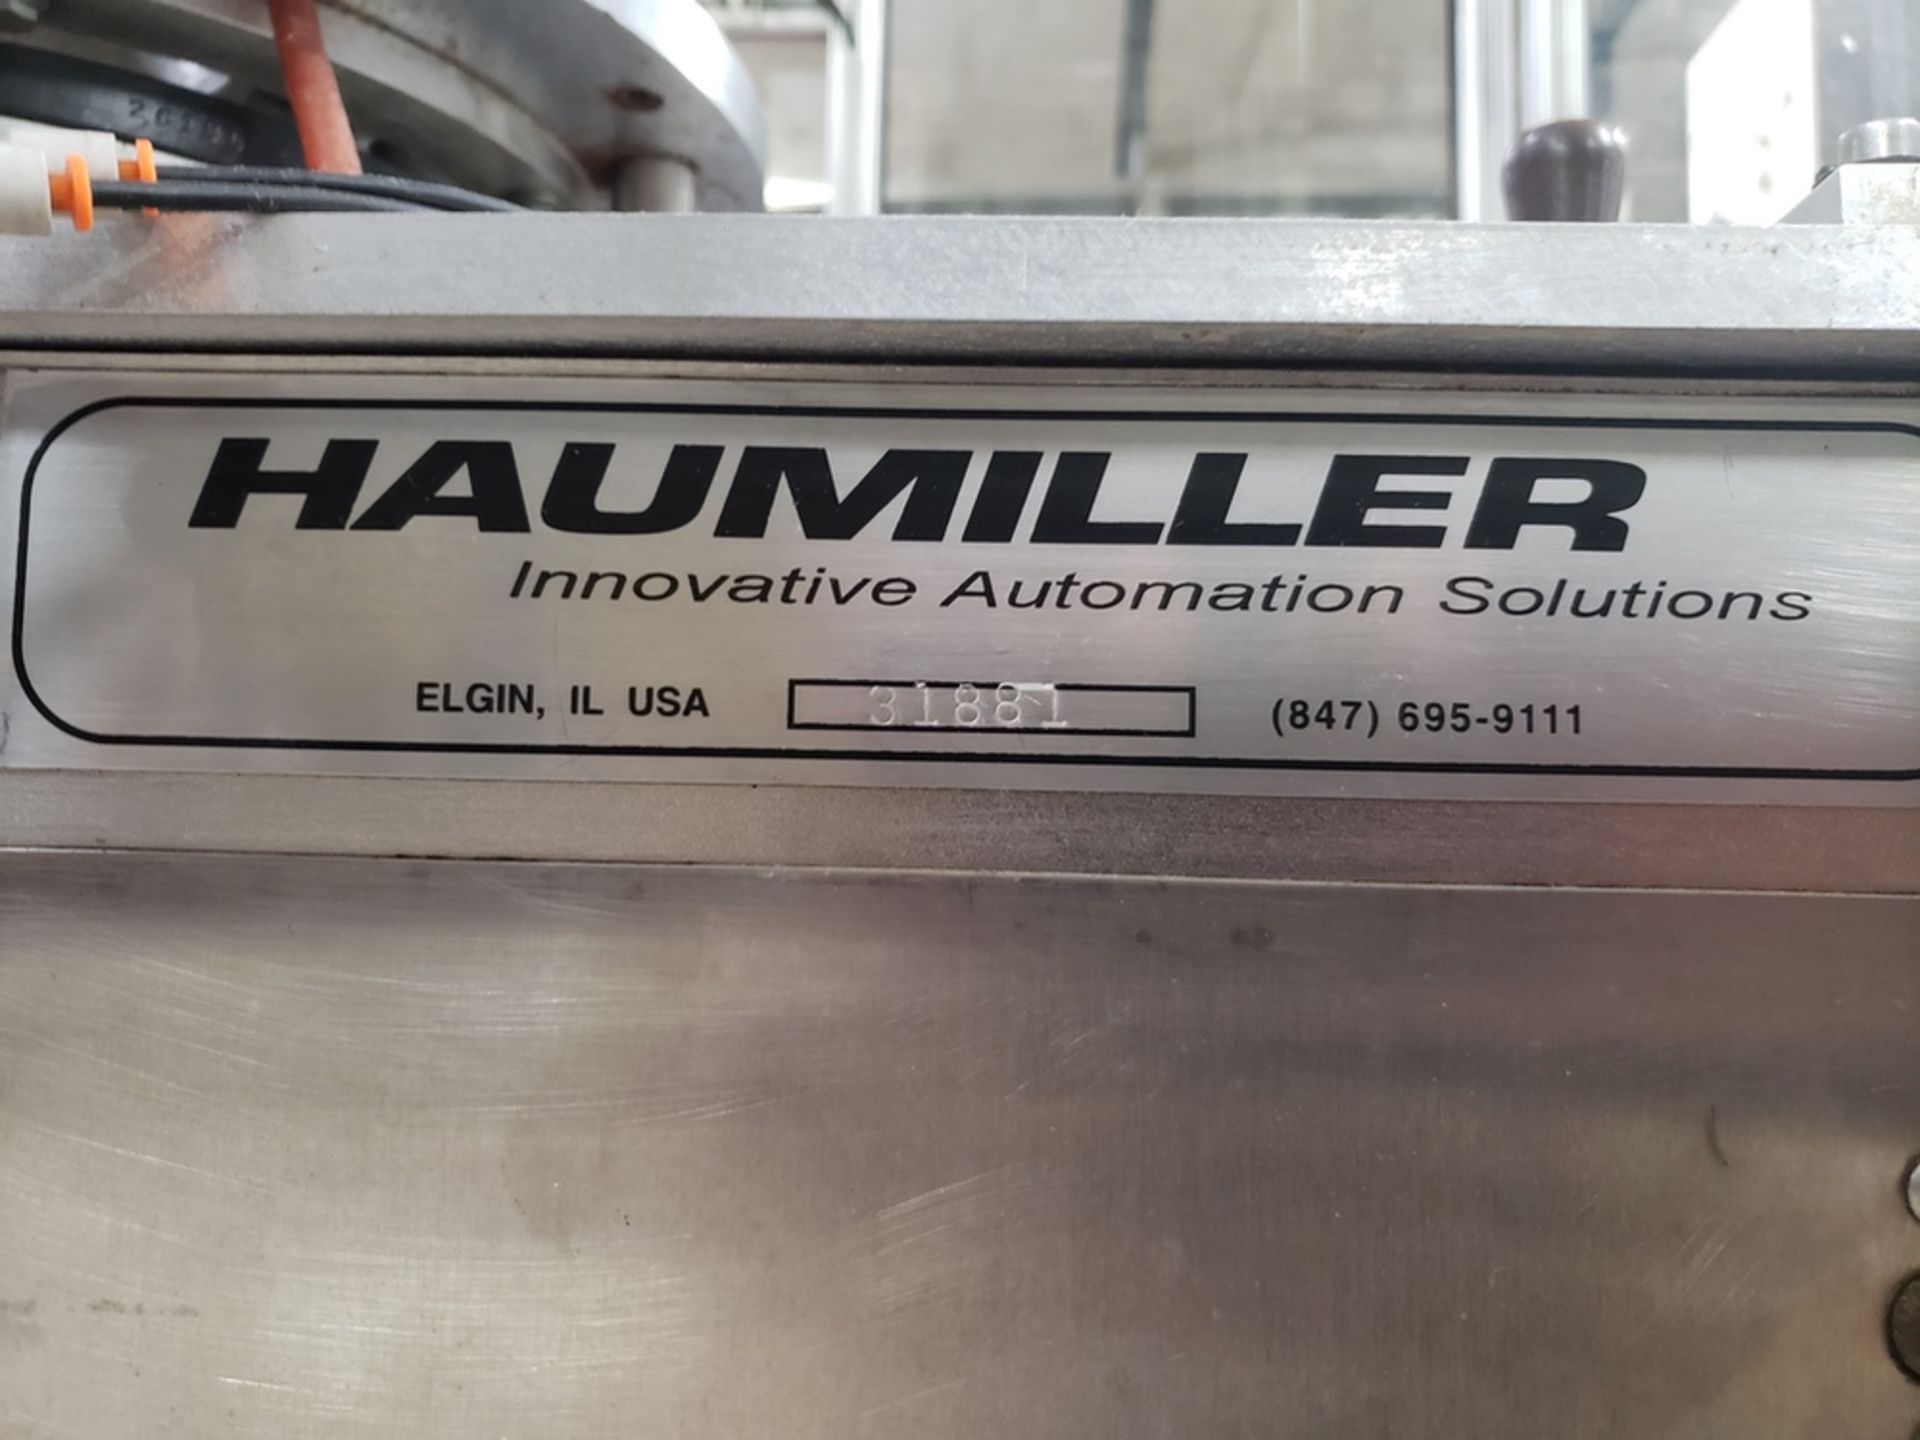 Haumiller Innovative Automation, S/N 31881 | Rig Fee $125 - Image 2 of 3